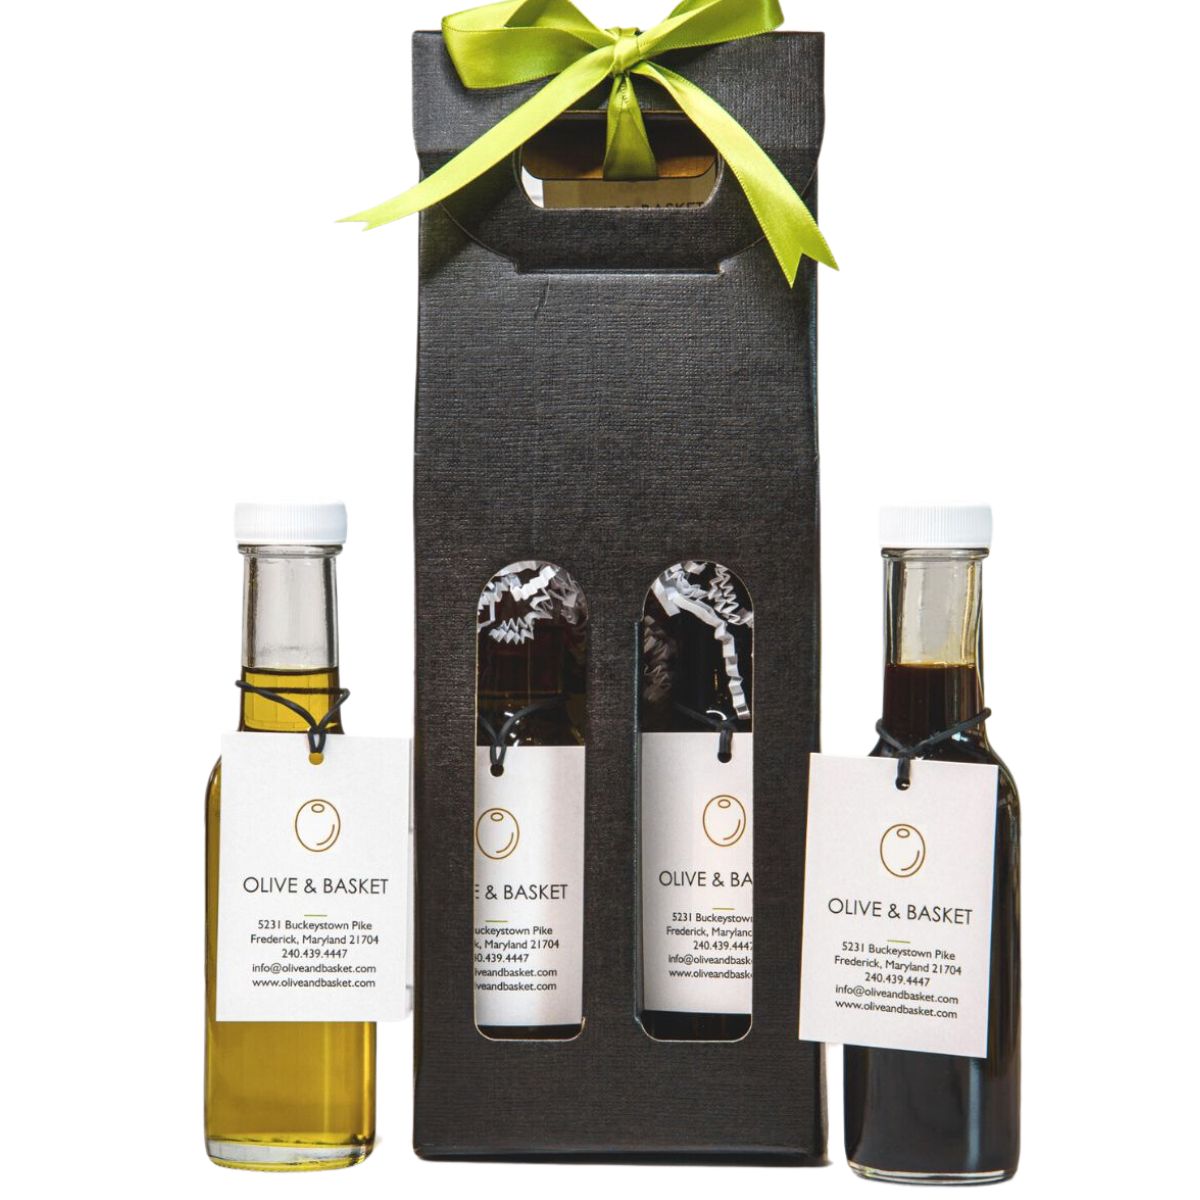 TRADITIONAL BALSAMIC VINEGAR AND TUSCAN HERB EVOO DUO GIFT SET